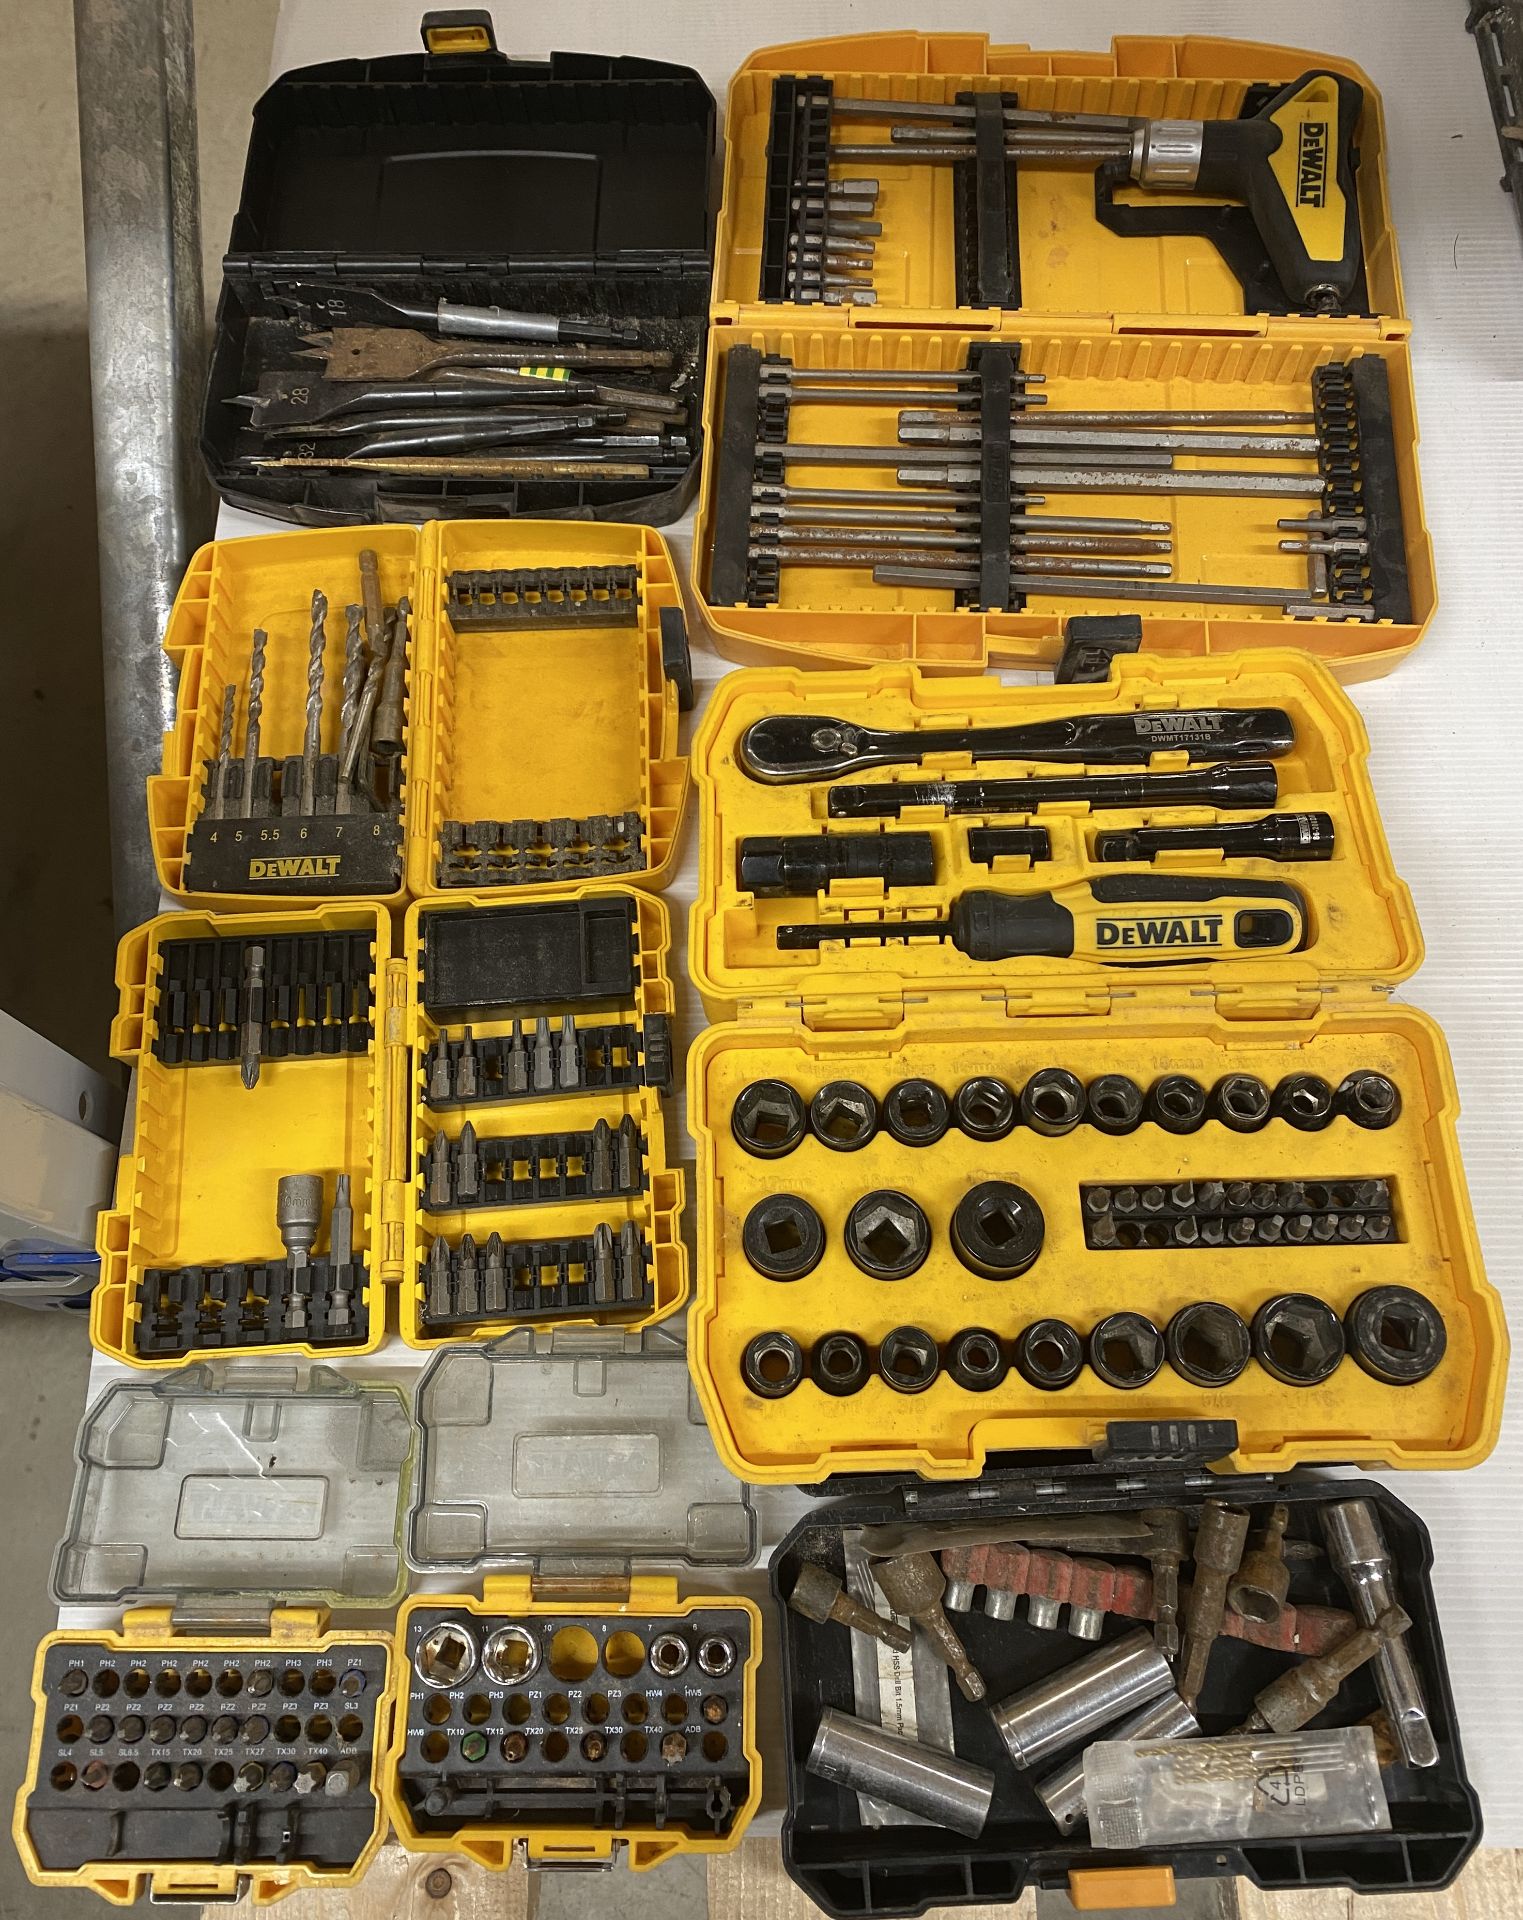 DeWalt impact driver set and 7 x assorted boxes and contents - drill bits,